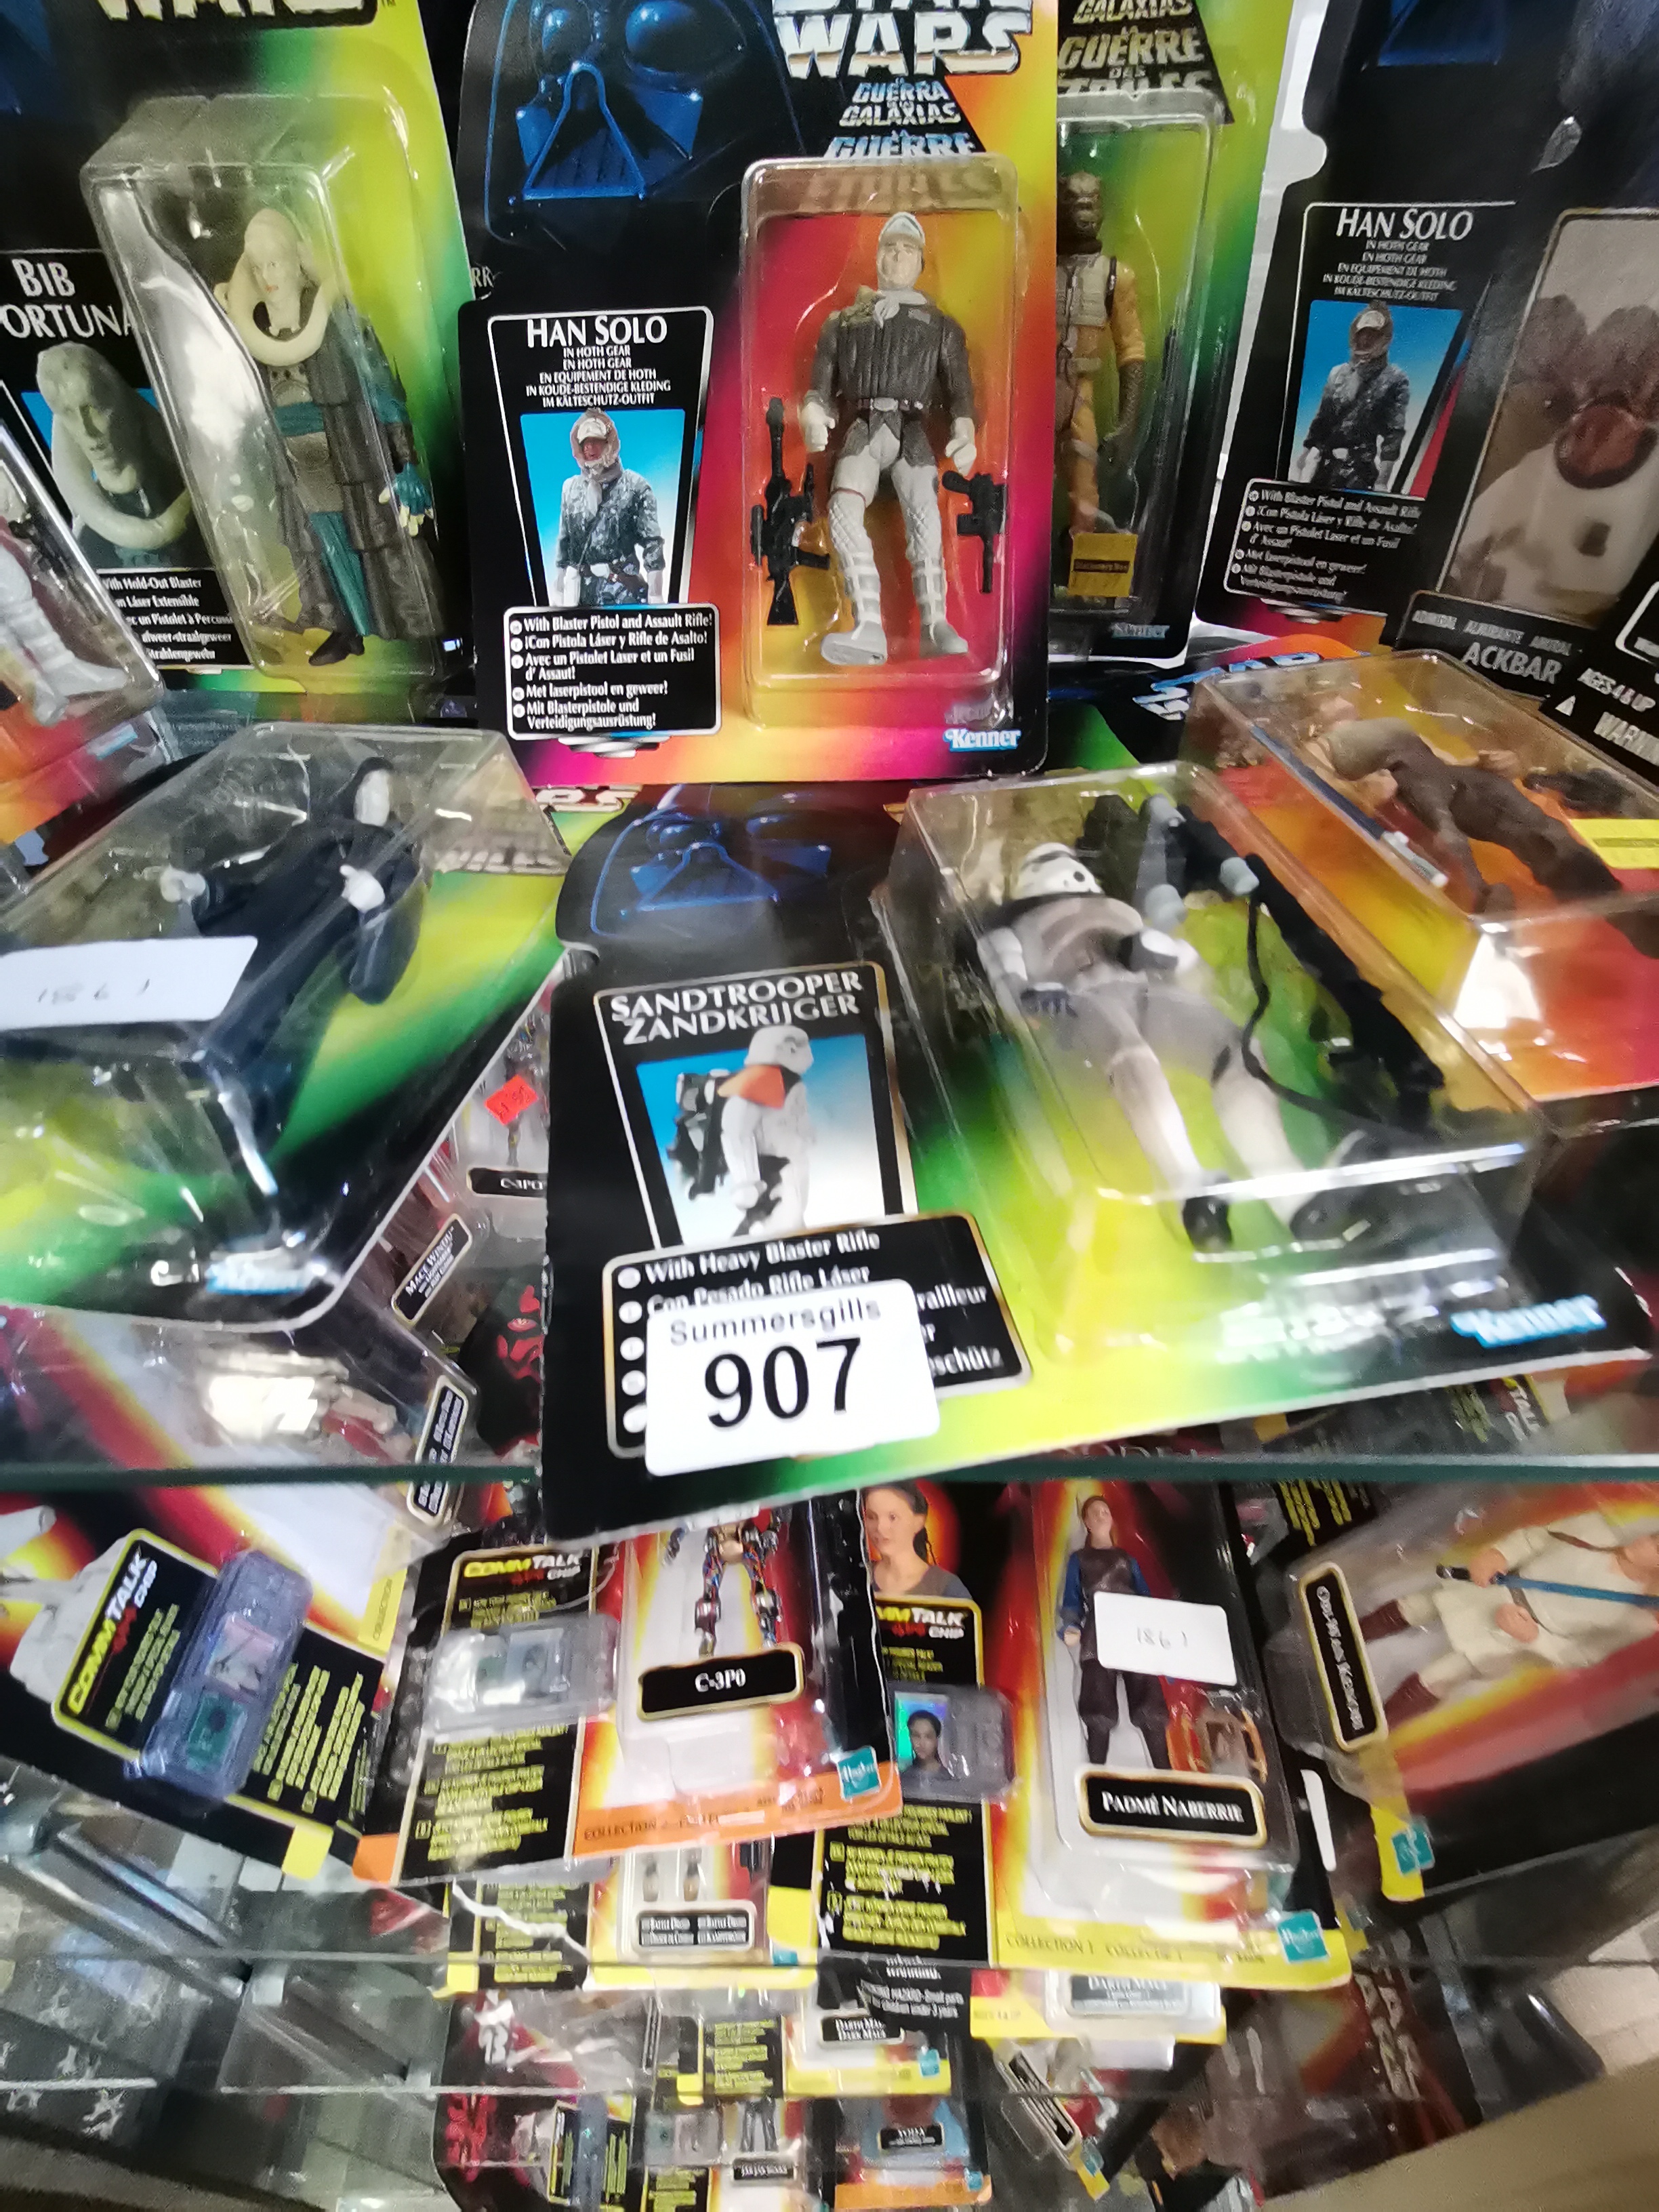 Over 50 boxed Star Wars figures